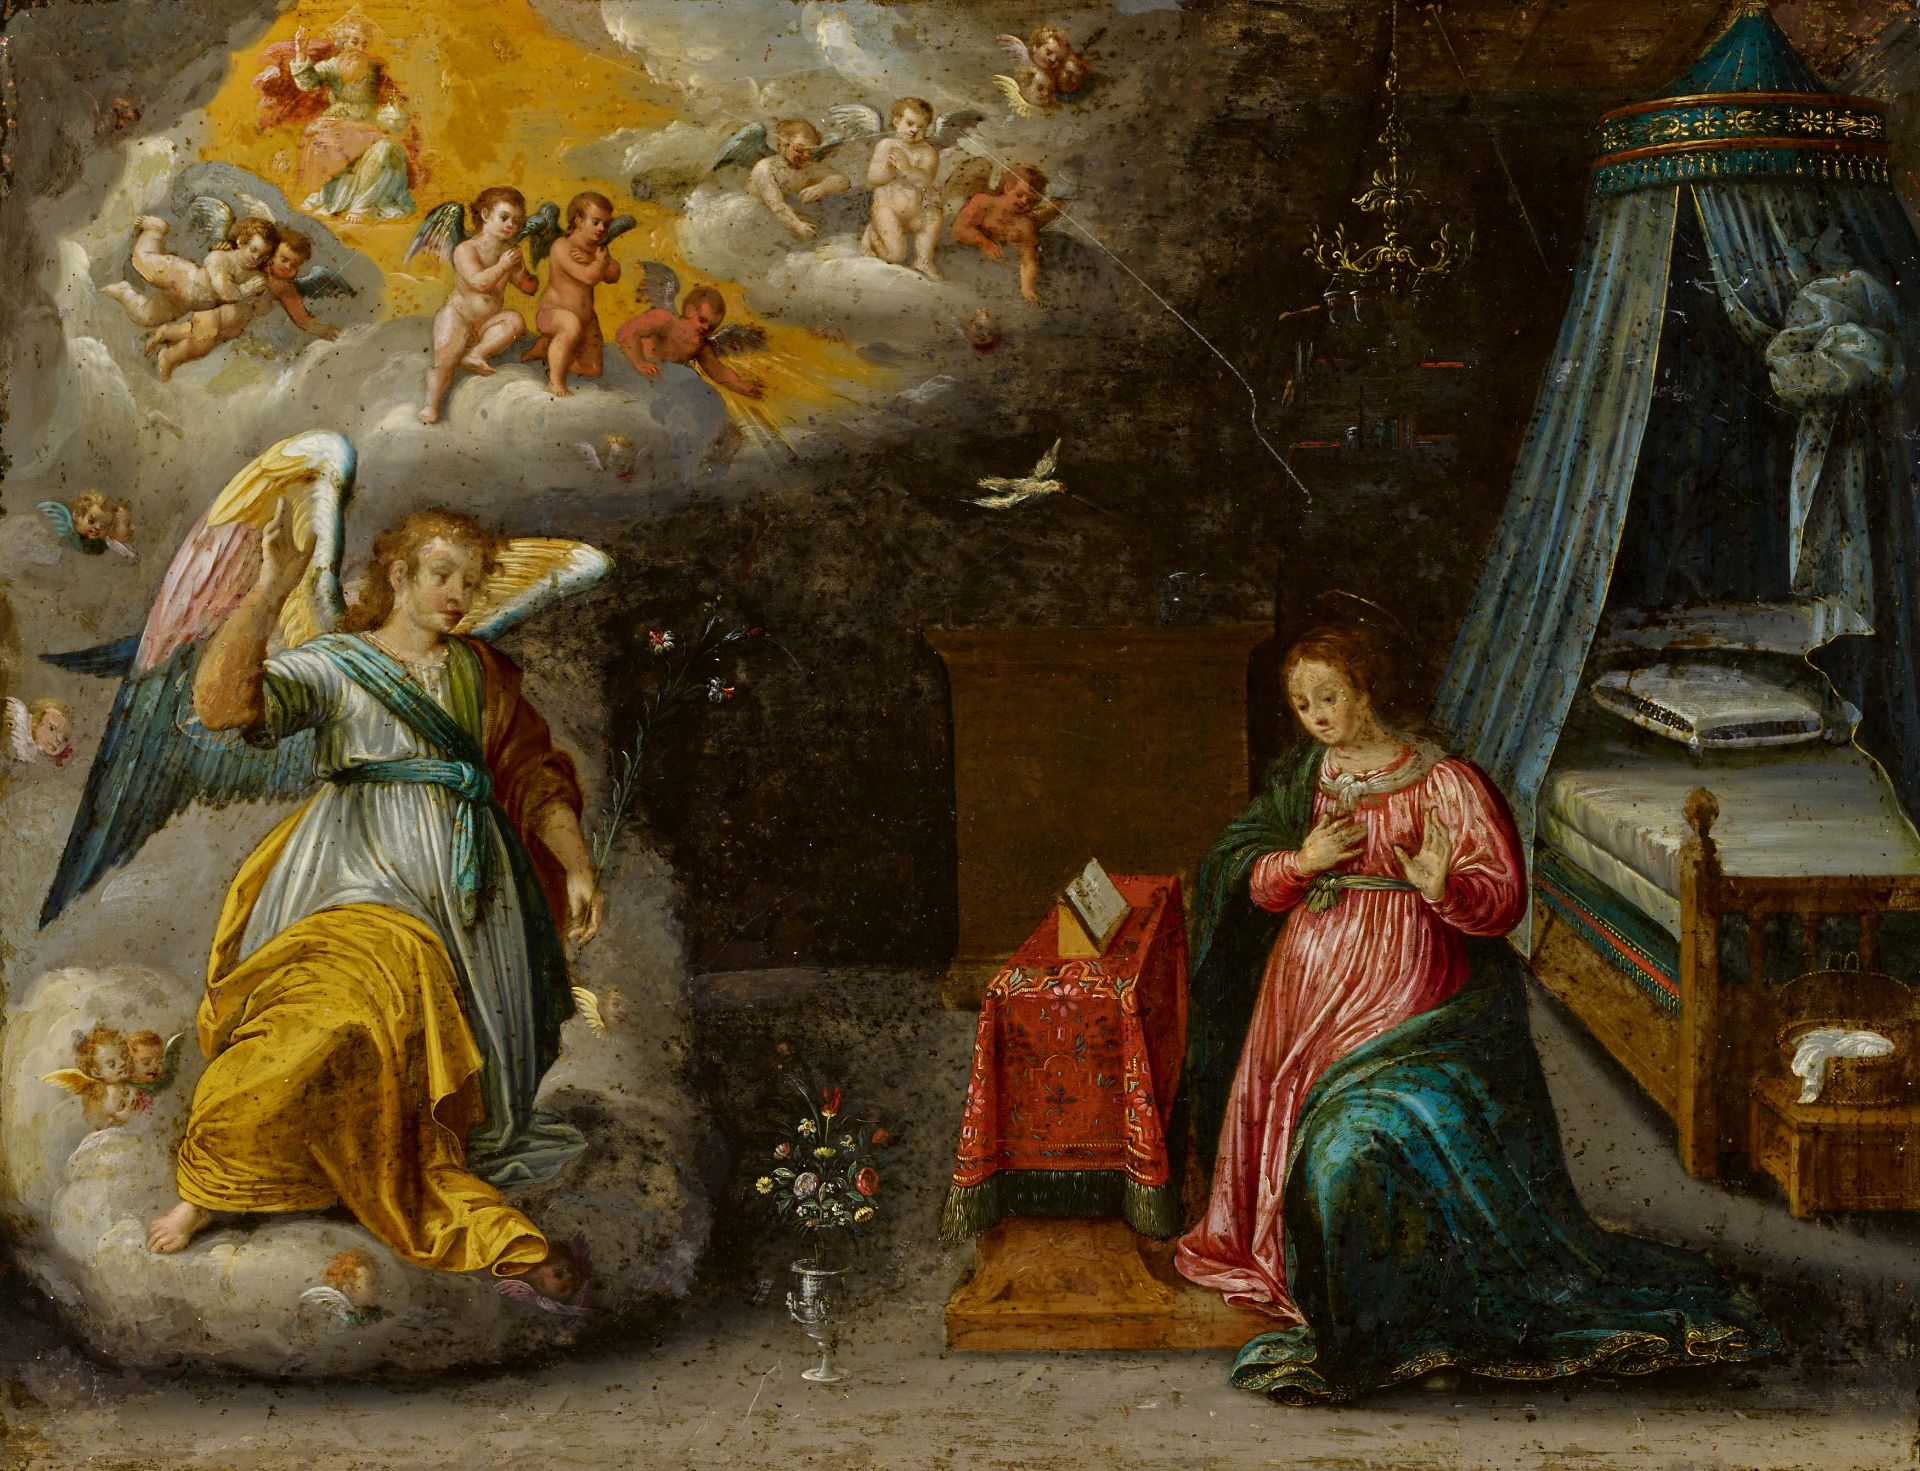 Flemish School: The Annunciation of Mary